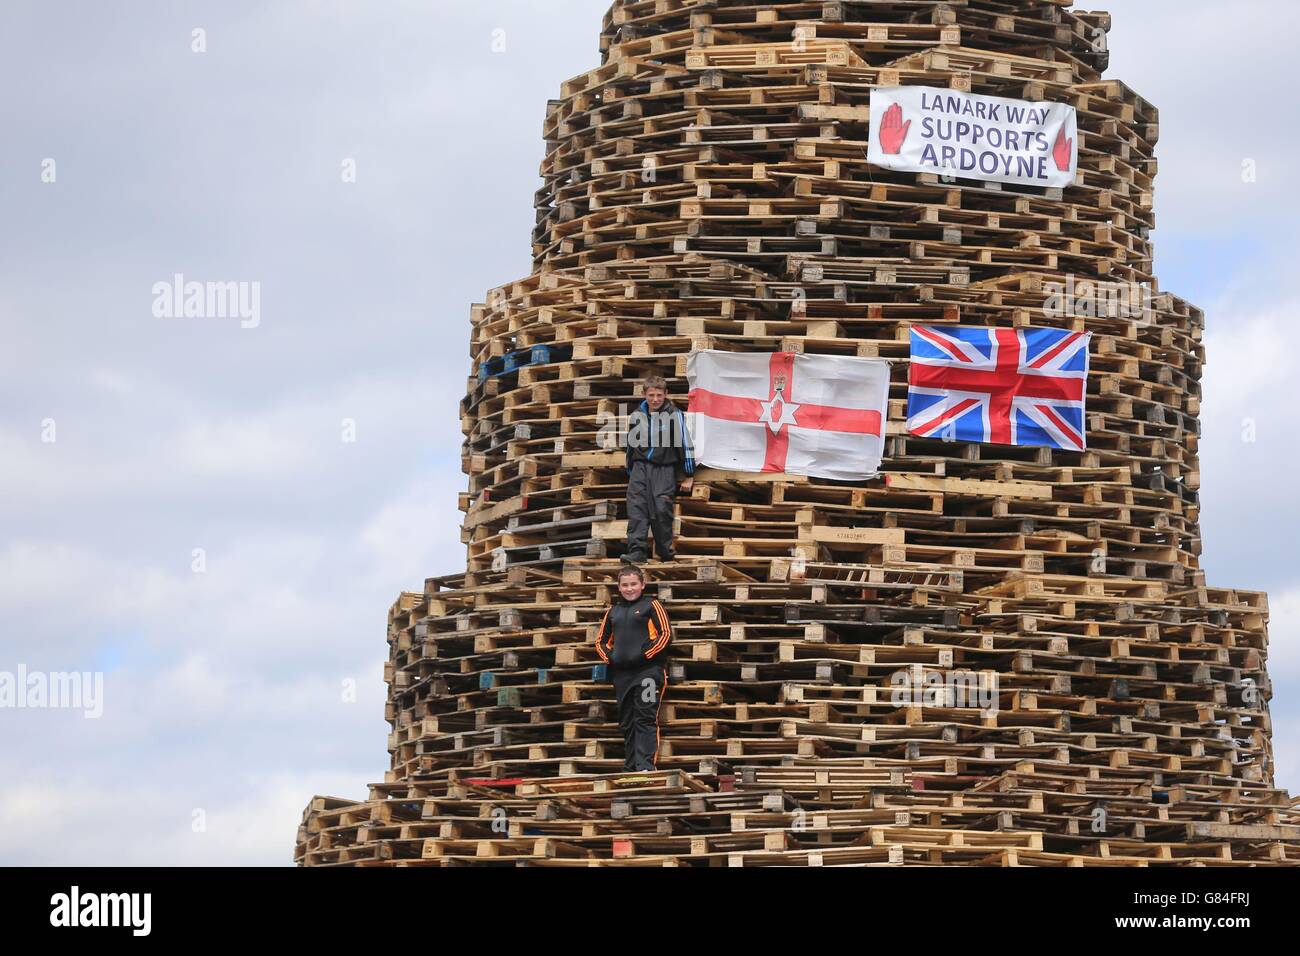 Bonfire builders in the New Mosley area of Belfast, hundreds of fires will be set alight at midnight, on the July 11, as loyalists celebrate the July 12, remembering the defeat of the catholic King James, by the Protestant William of Orange in 1690. Stock Photo